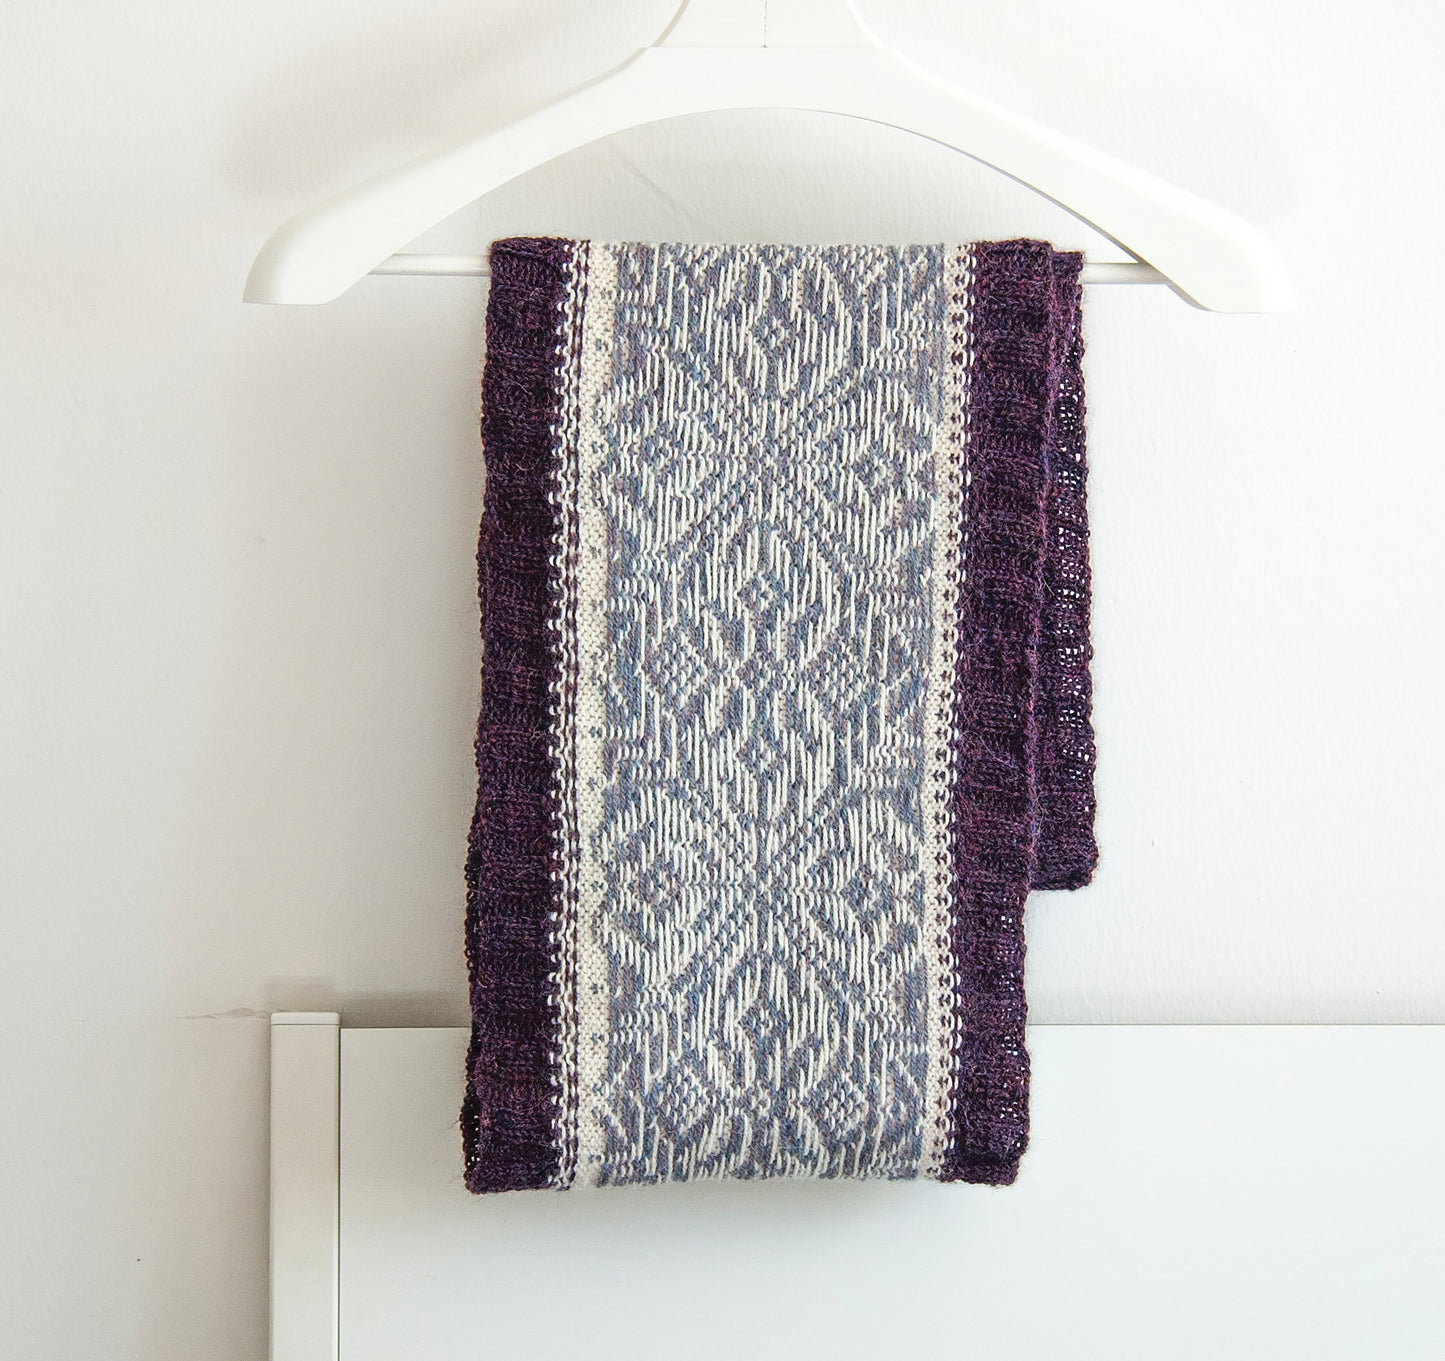 hand-knitted Fair Isle cowl  in Snowflake pattern made from purple and white alpaca wool yarn wrong side 